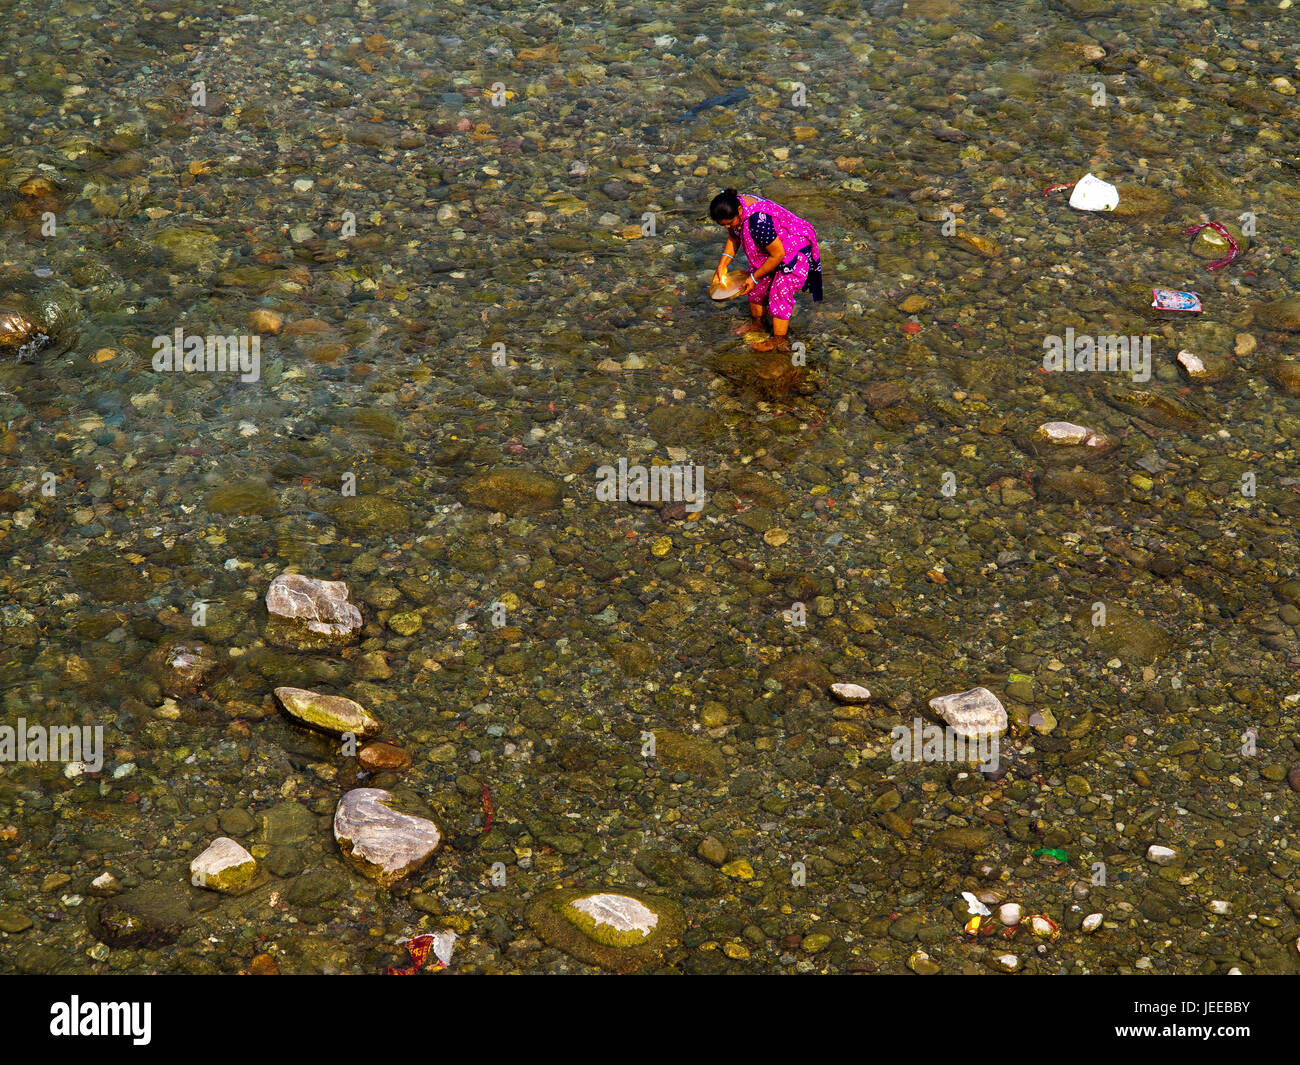 Indian woman in traditional colorfull clothes washing dishes in the Kosi River at Garjiya, Uttarakhand, India Stock Photo